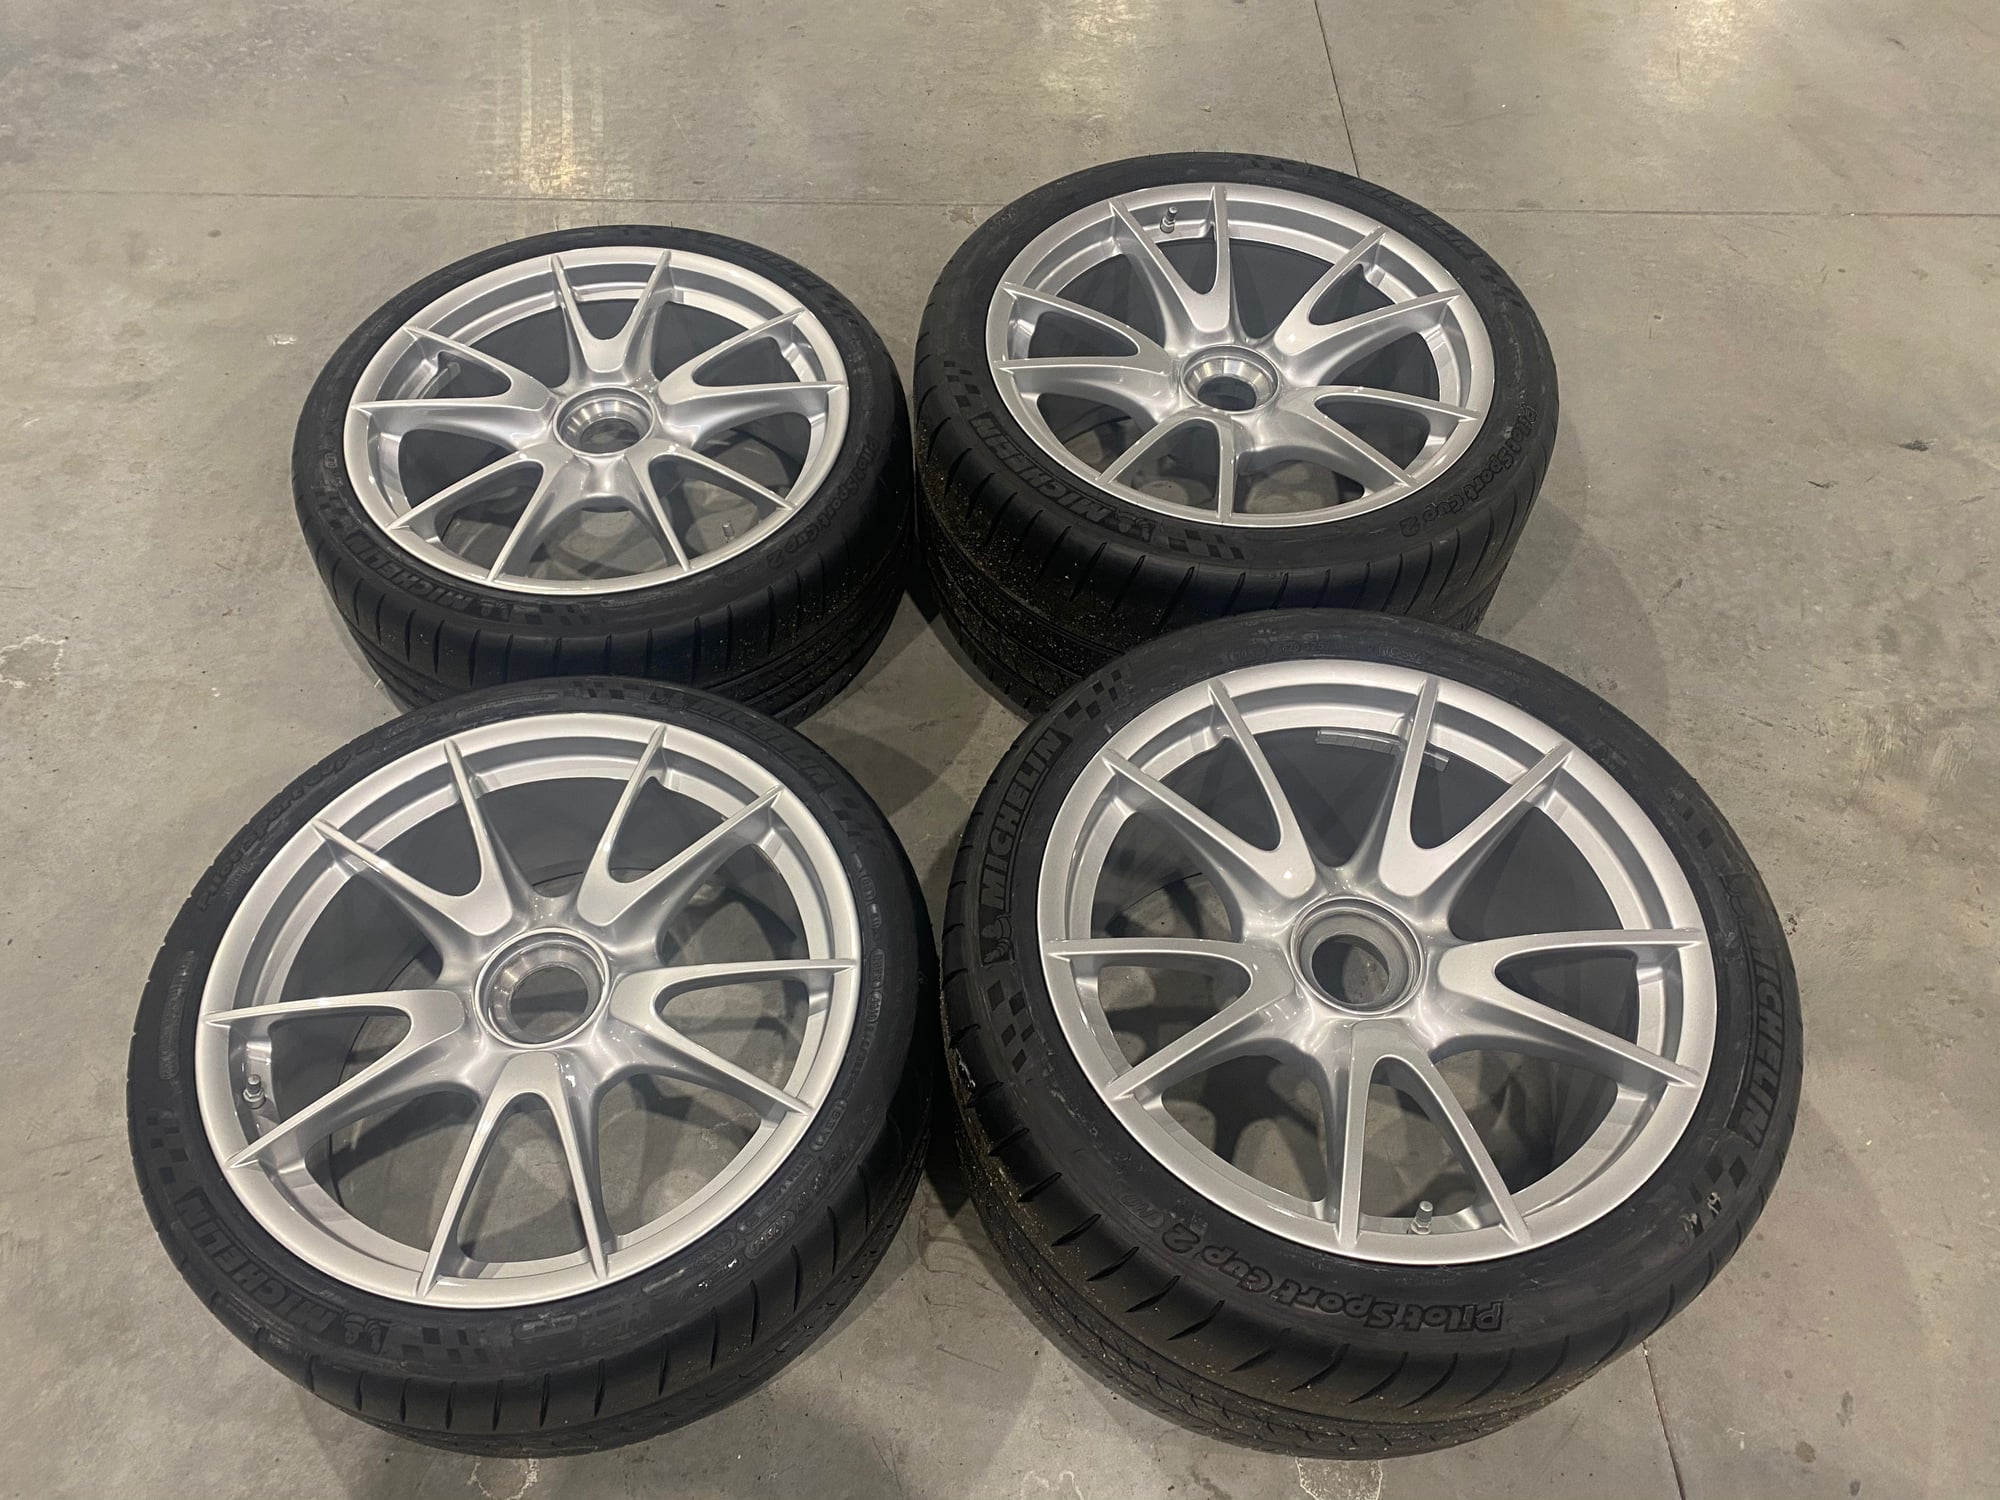 Wheels and Tires/Axles - Brand NEW OEM Porsche 997.2 GT3 RS 4.0 Wheel, Tire and TPMS Set - New - 2011 to 2012 Porsche 911 - Olathe, KS 66062, United States